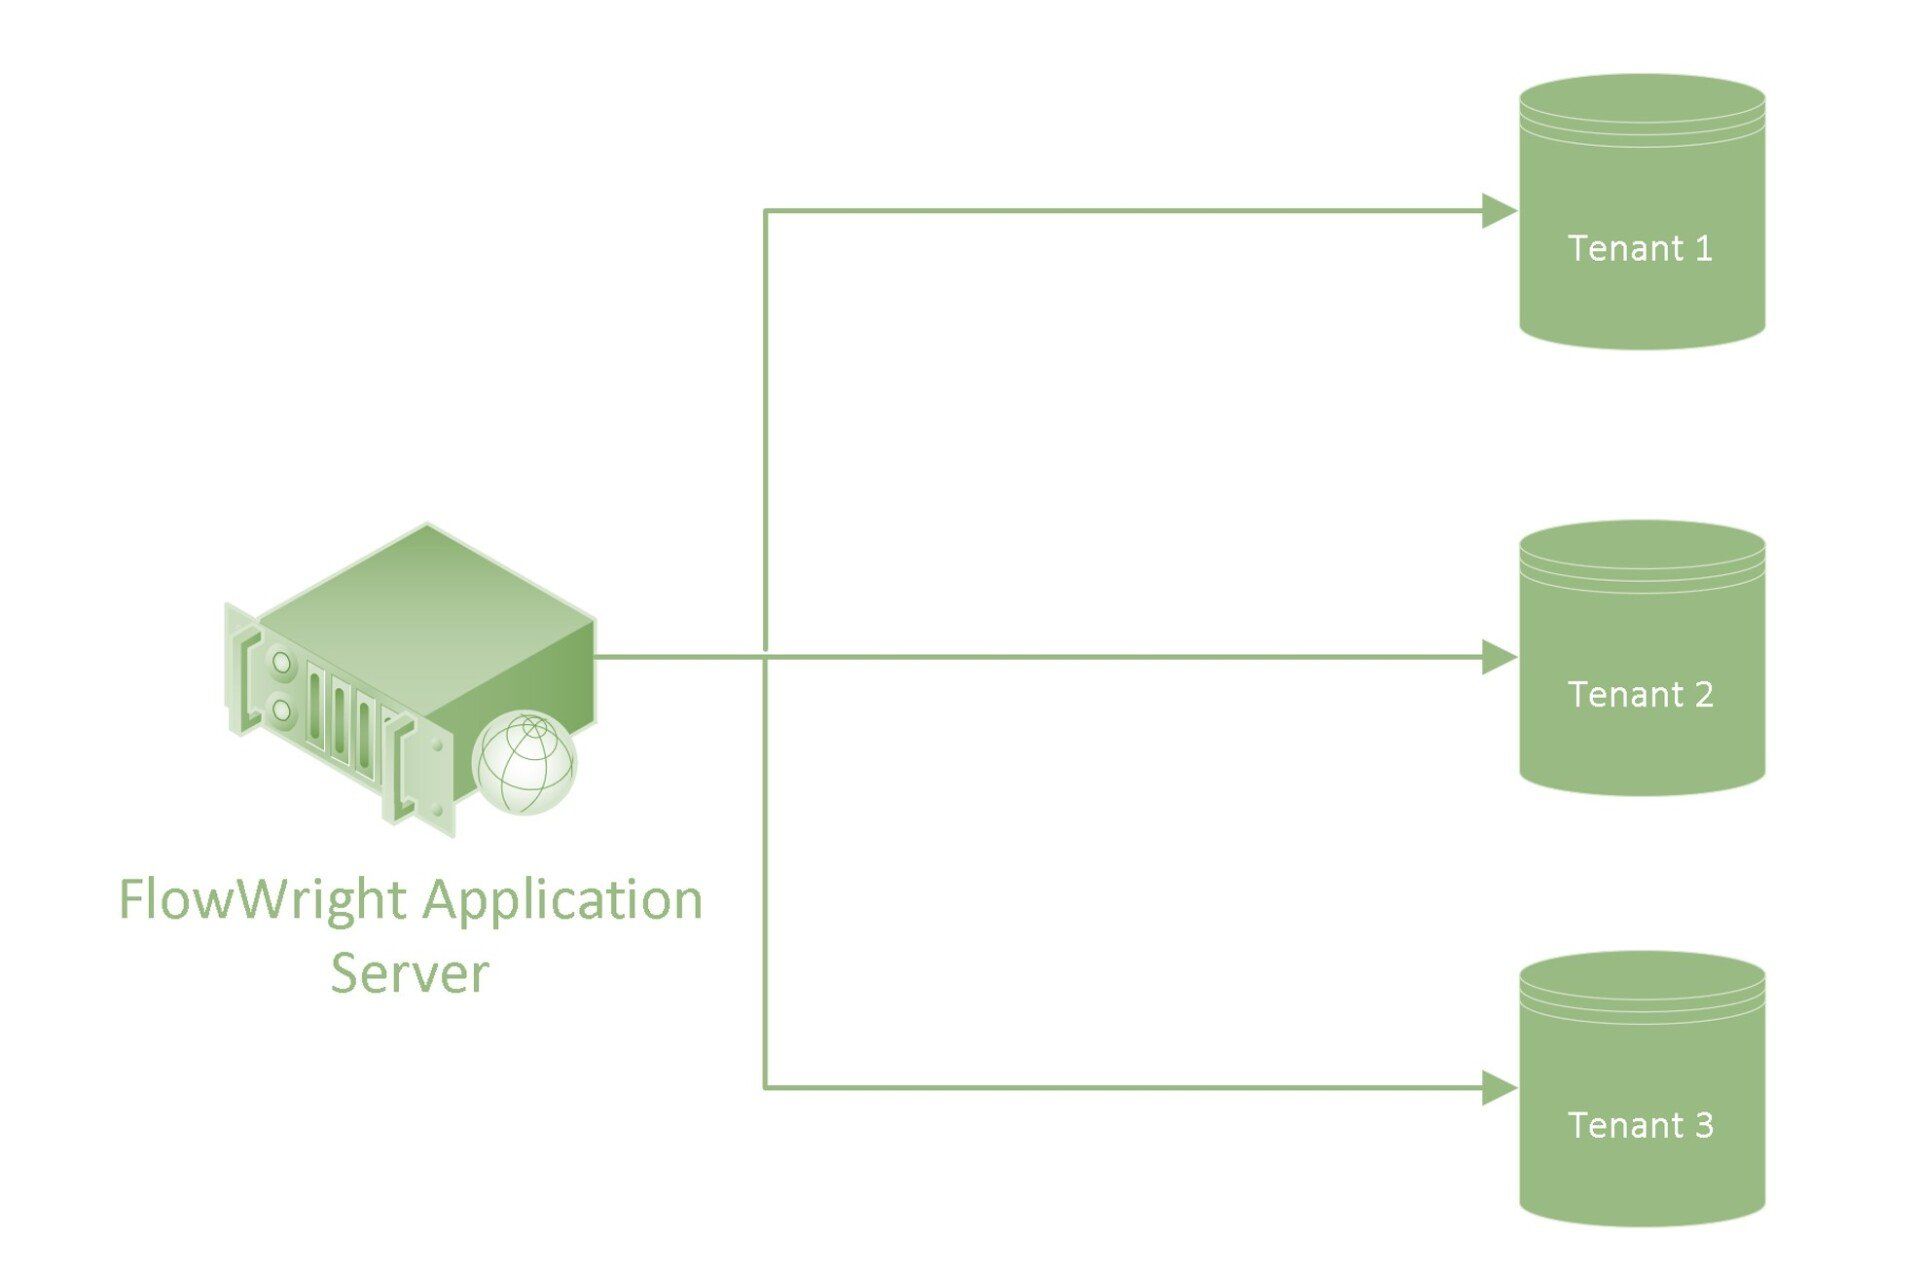 A diagram of a flowwright application server with three tenants.